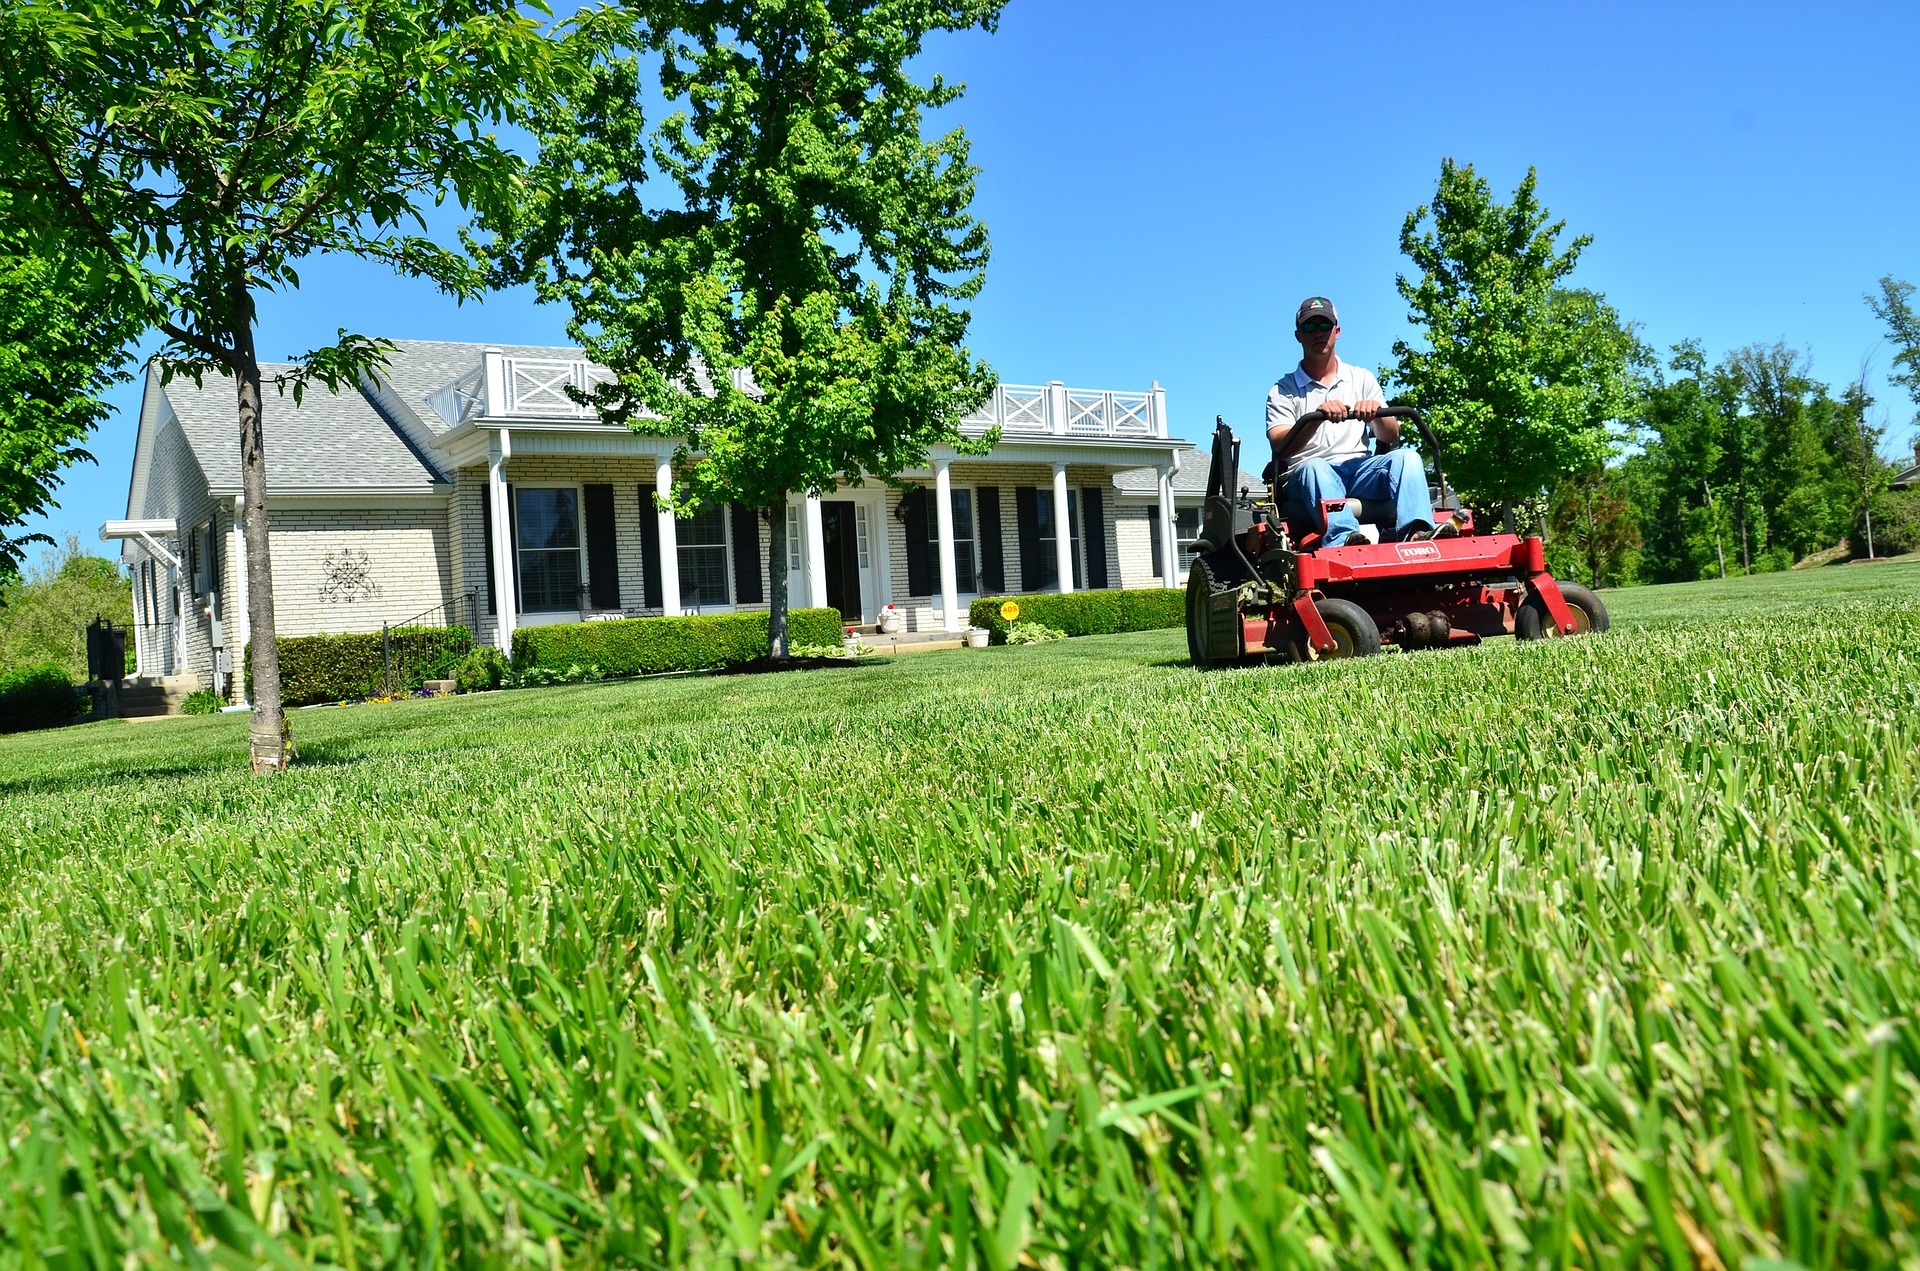 man mowing grass on riding lawnmower with house in background